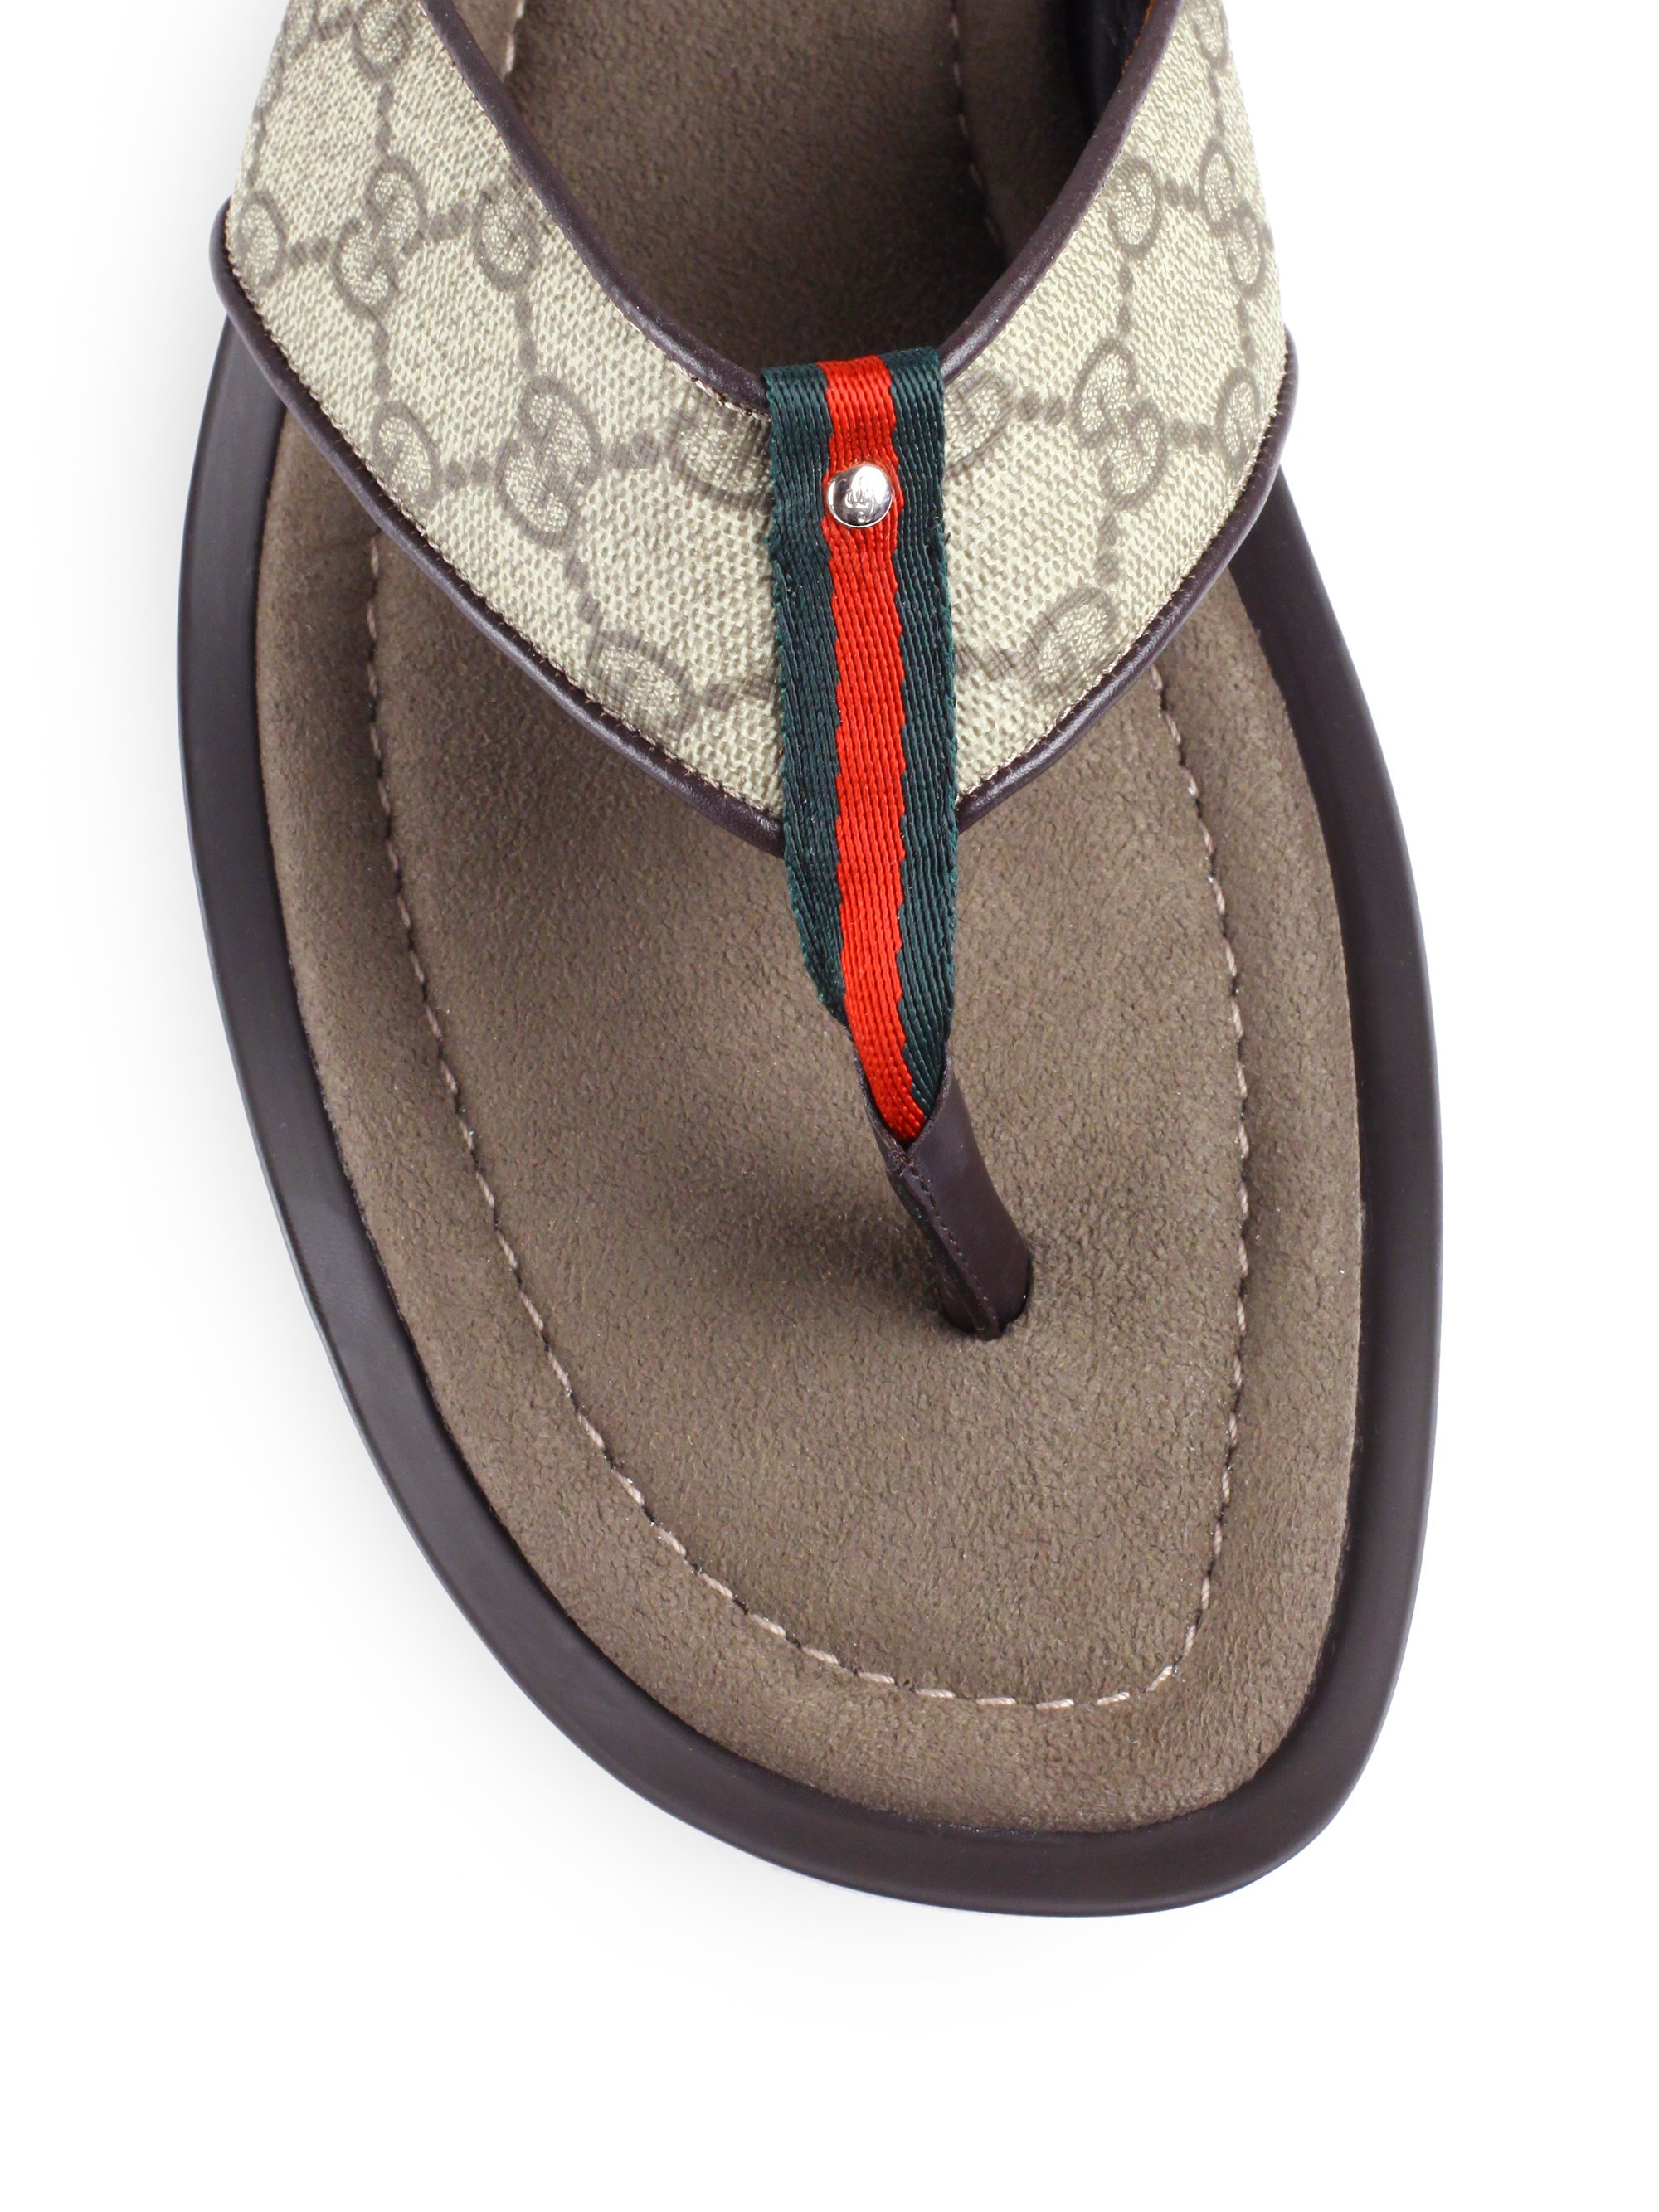 Lyst - Gucci Thong Sandal in Gray for Men